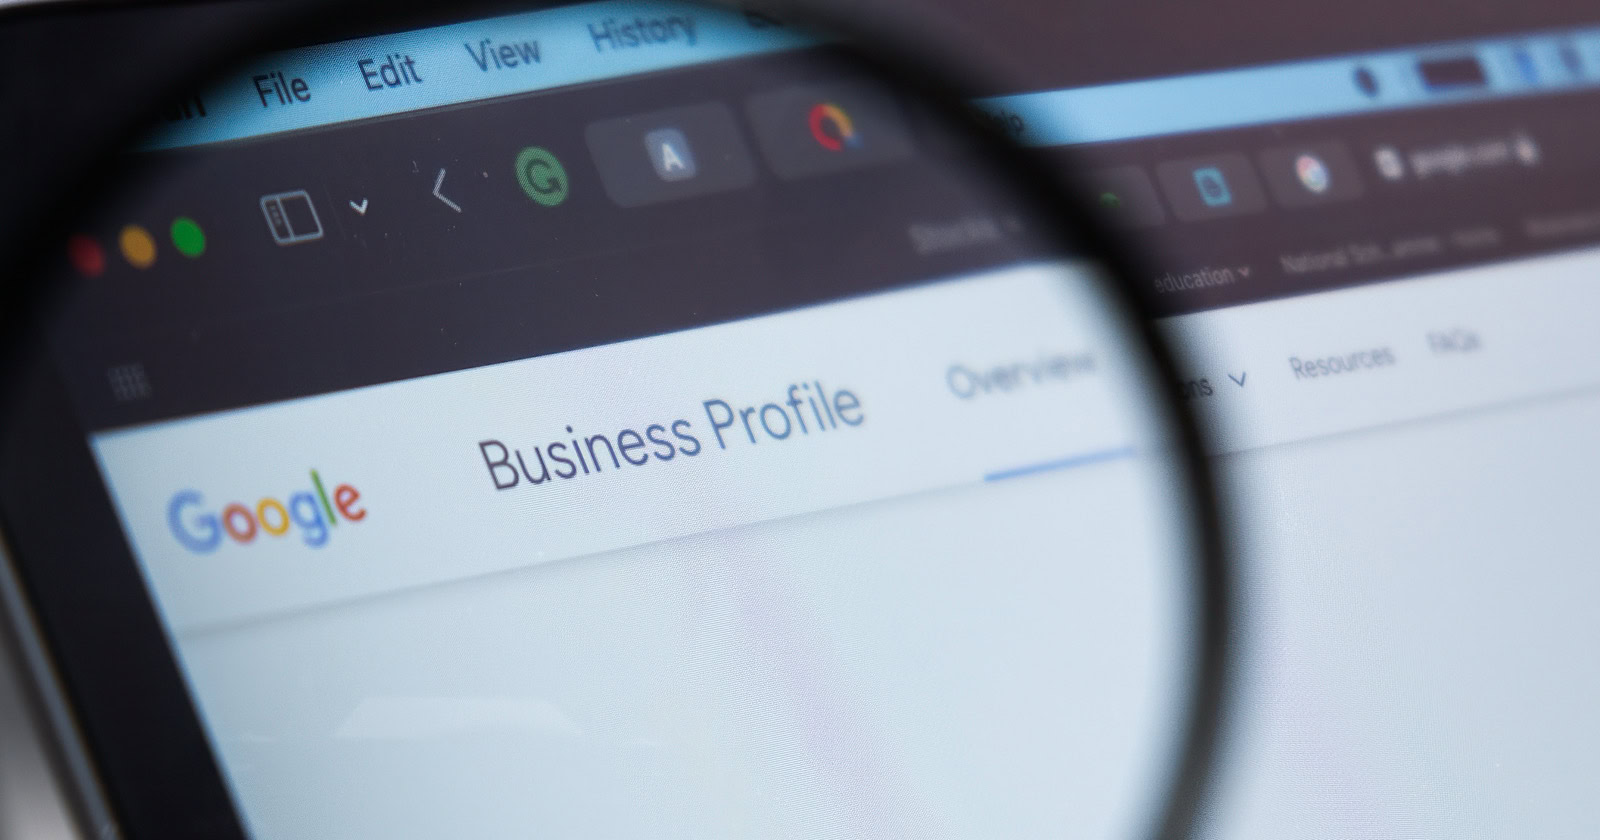 Google Business Profile logo on the screen of laptop through magnifying glass,